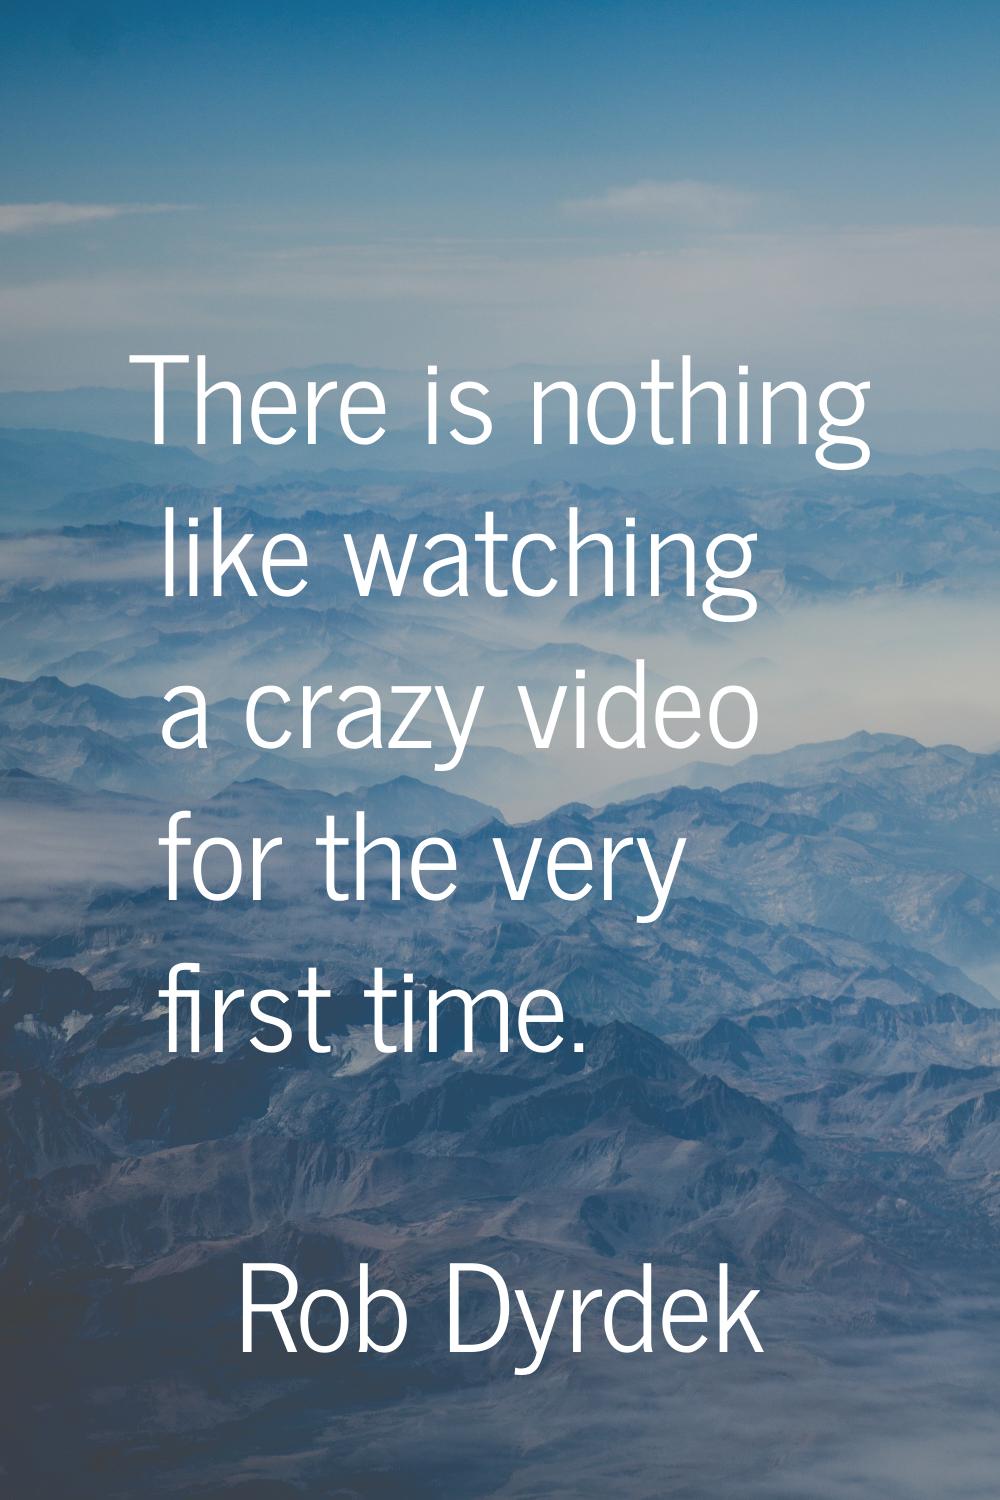 There is nothing like watching a crazy video for the very first time.